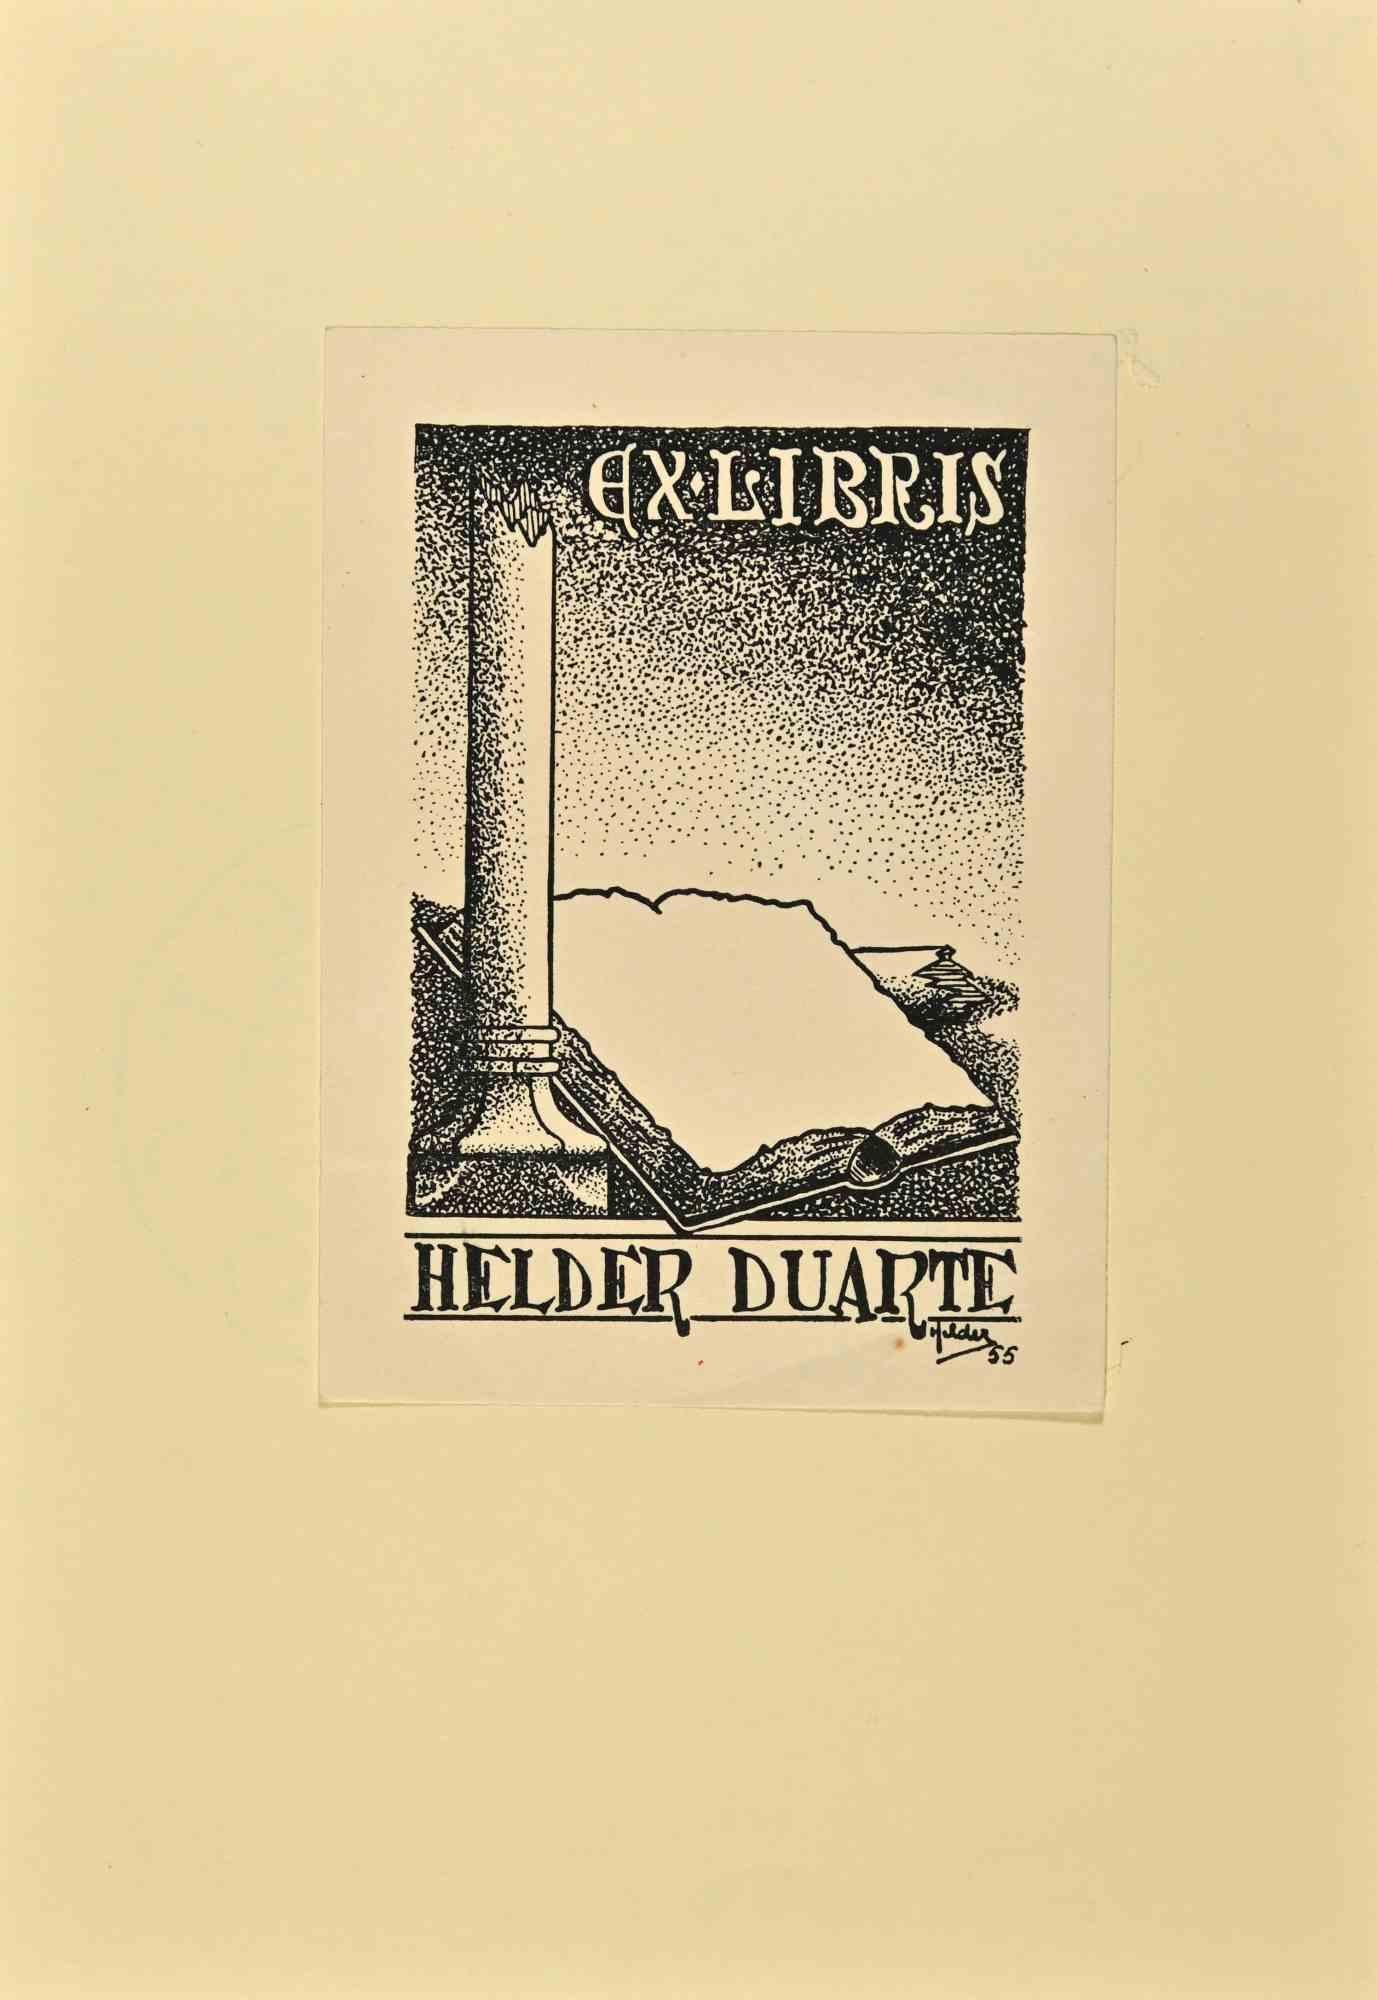 Ex Libris Helder Duarte is an Artwork realized in 1955 by Herberto Helder (1930-2015)

Woodcut B./W. print on paper. The work is glued on ivory cardboard. 

Total dimensions: 21 x 15 cm.

Excellent conditions.

The artist wants to define a